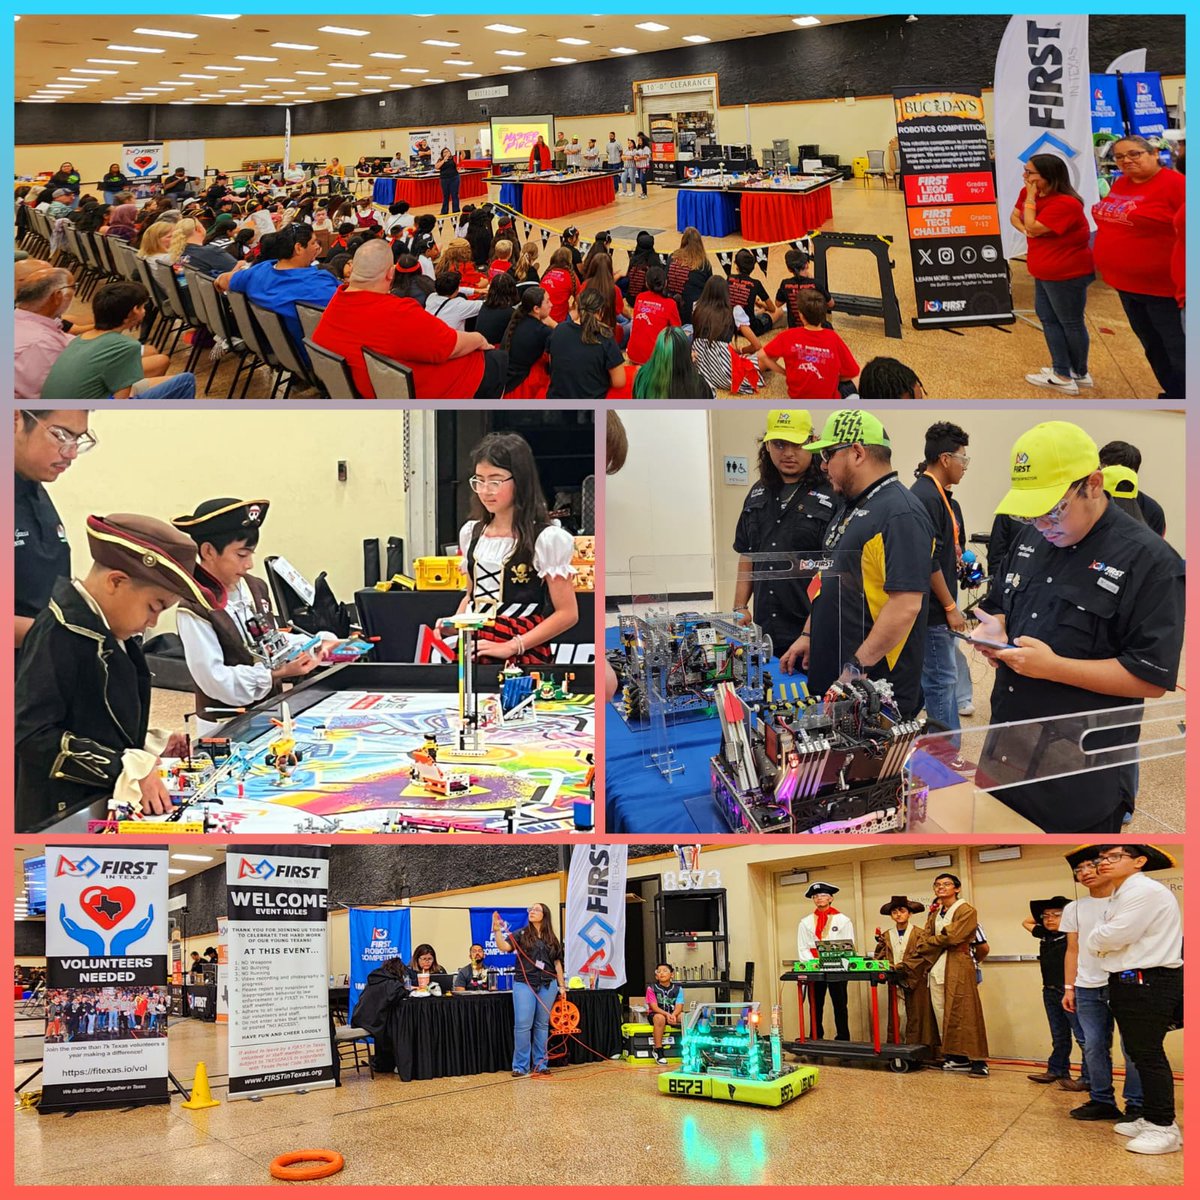 Buc Days: Congratulations to all the winners at the FIRST in Texas 2024 FLL Buc Days event on May 5th. Thank you volunteers, sponsors and teams that made this event possible and lots of fun! 🤖❤️💪 #BucDays #robotics